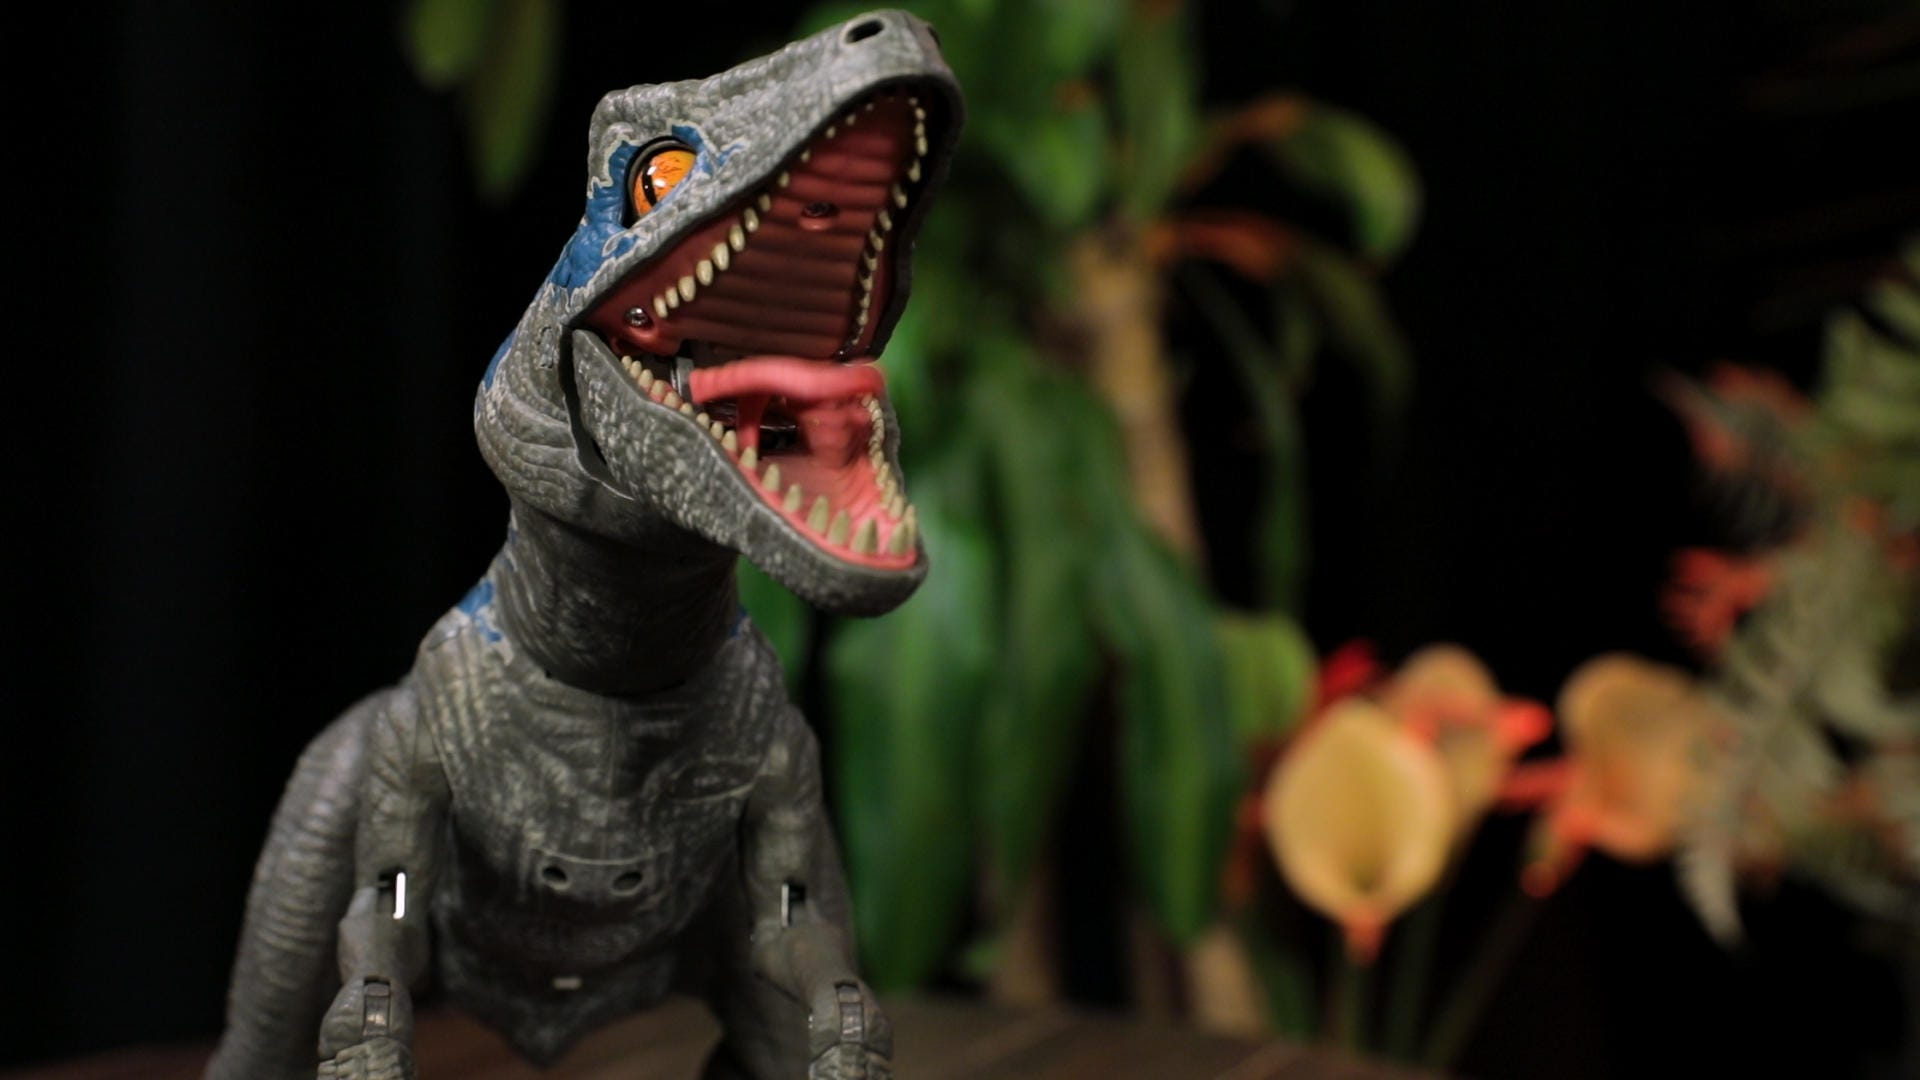 This Jurassic World robot raptor is one clever girl - Video - CNET